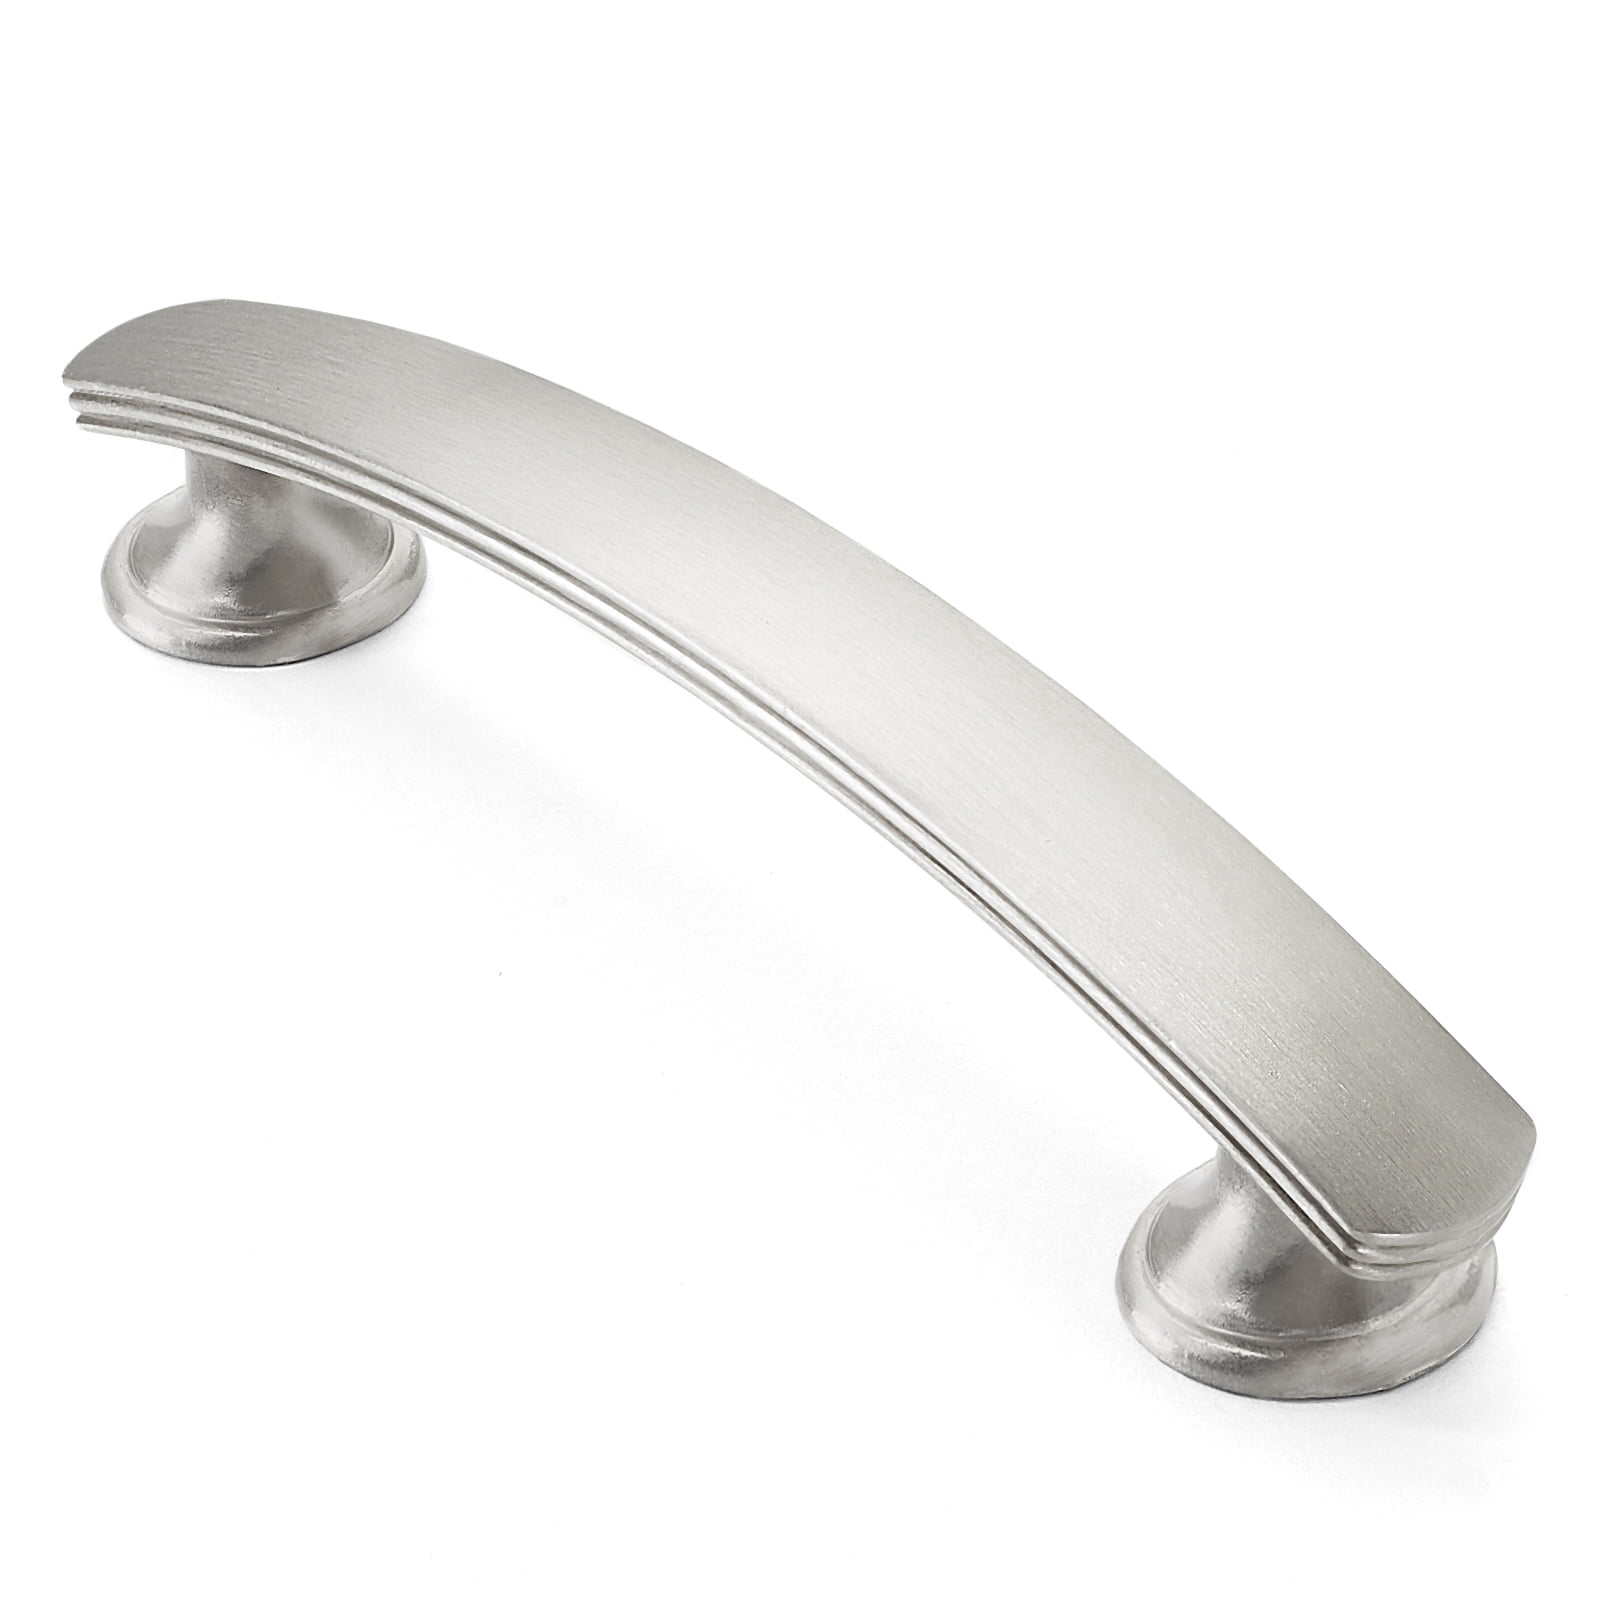 Curved cupboard handles